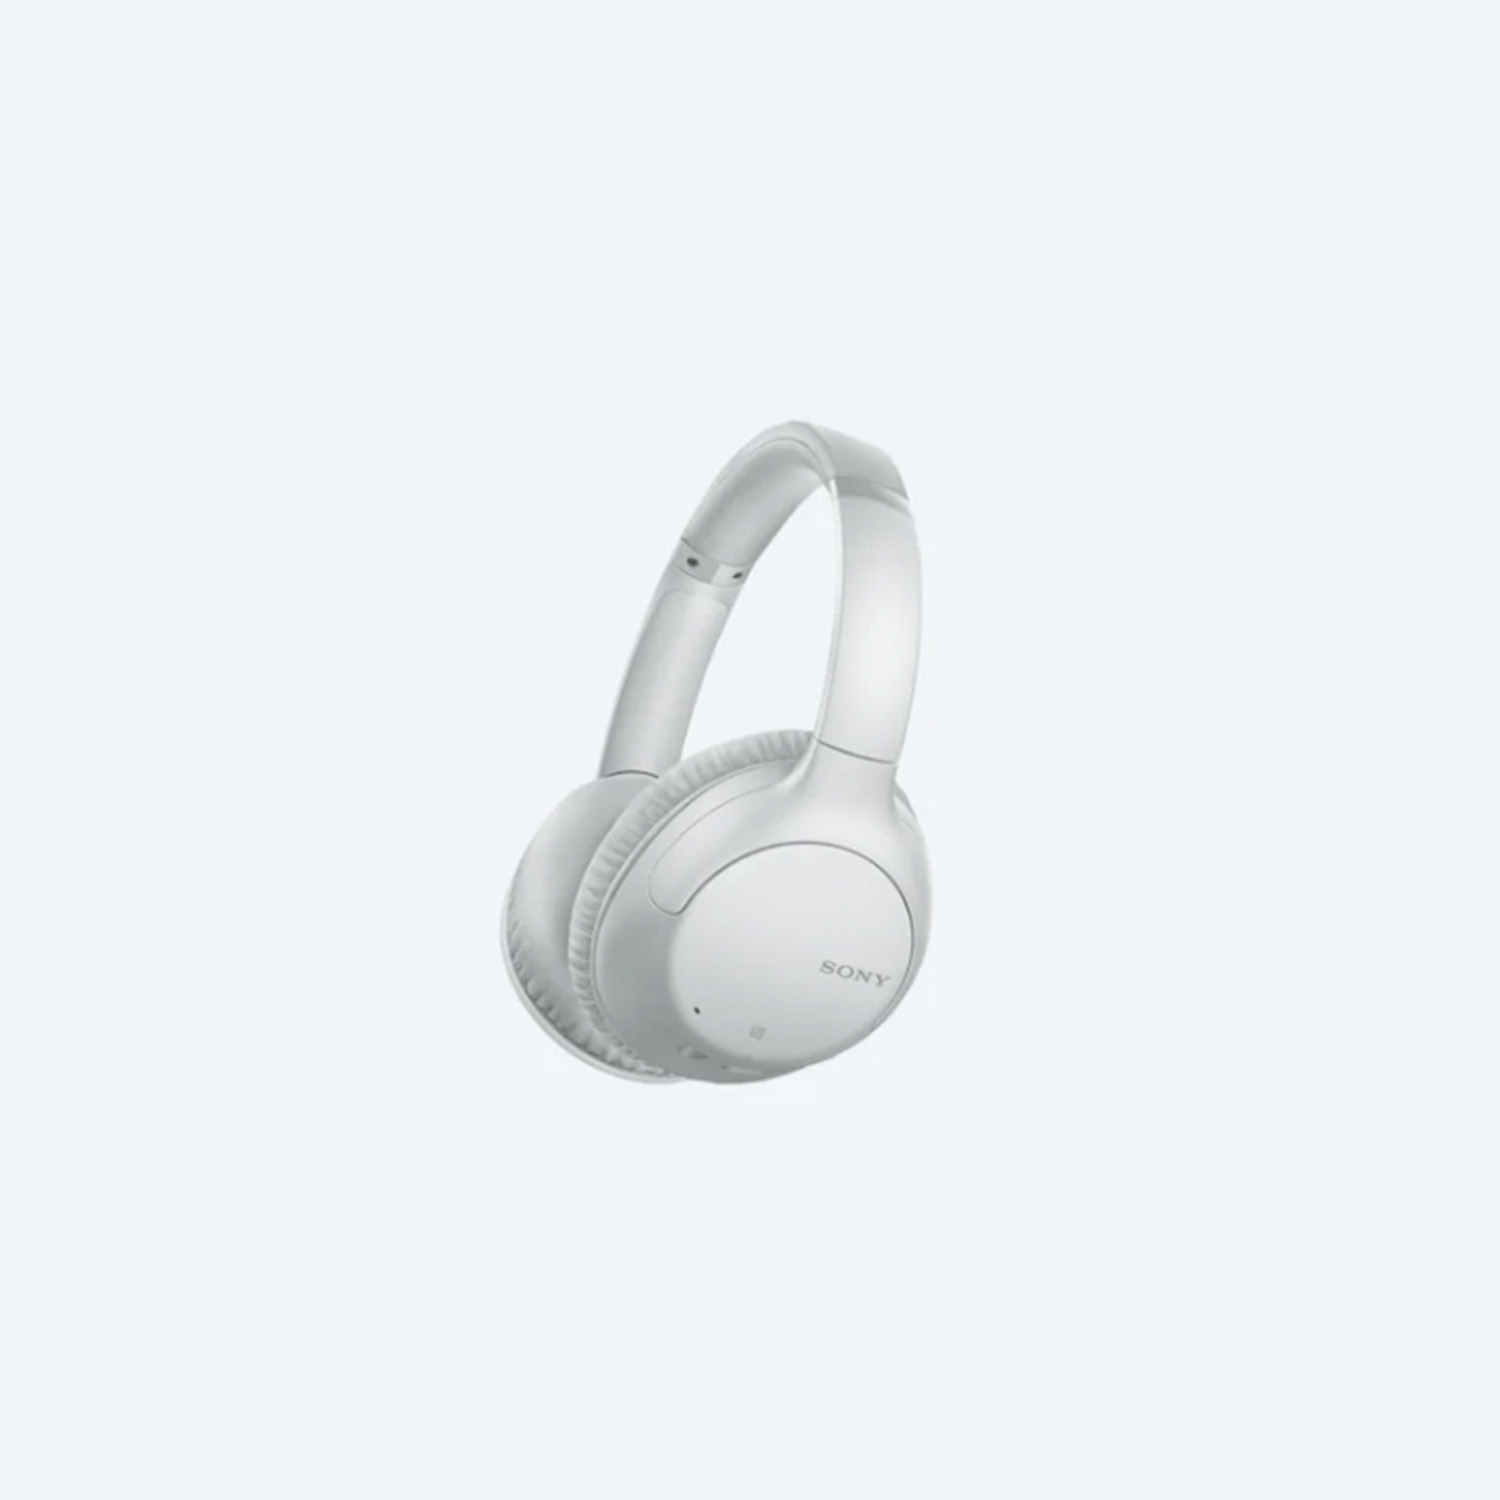 Sony WHCH710NWCE7 Wireless Over Ear Noise Cancelling Headphones - White - 0